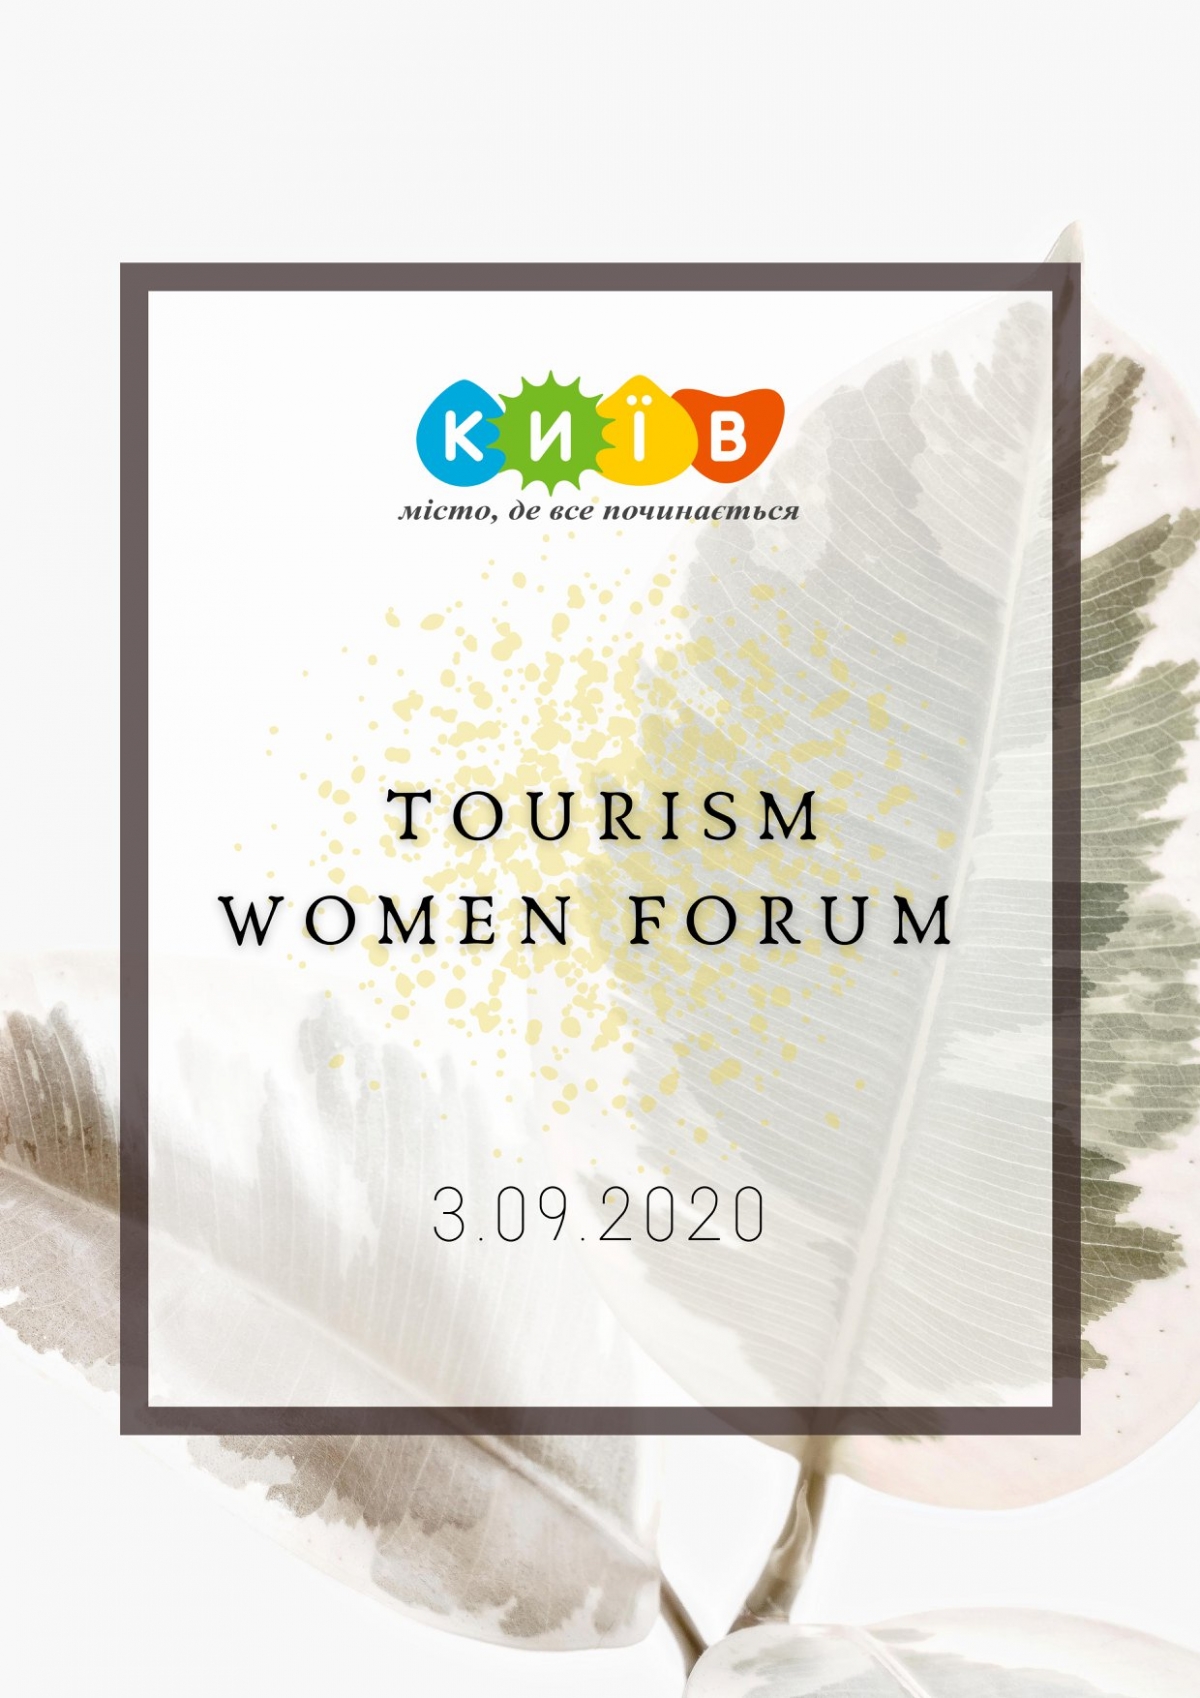 Inviting you to take part in the online Tourism Women Forum